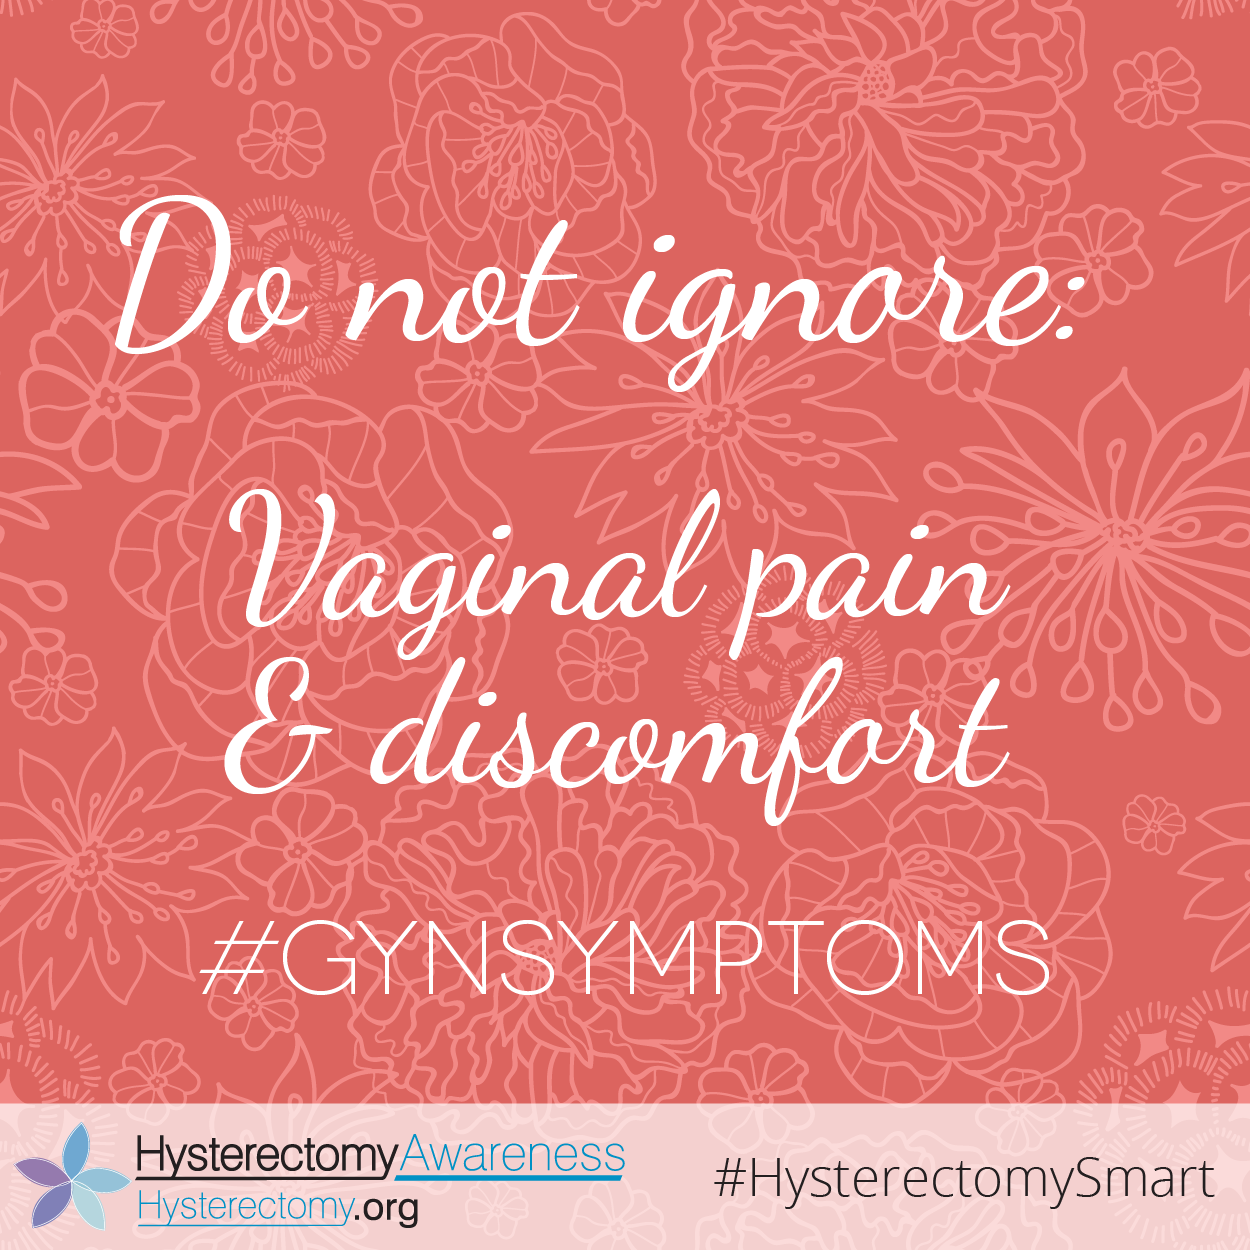 Do not ignore: Vaginal pain & discomfort #GYNSymptoms #HysterectomySmart